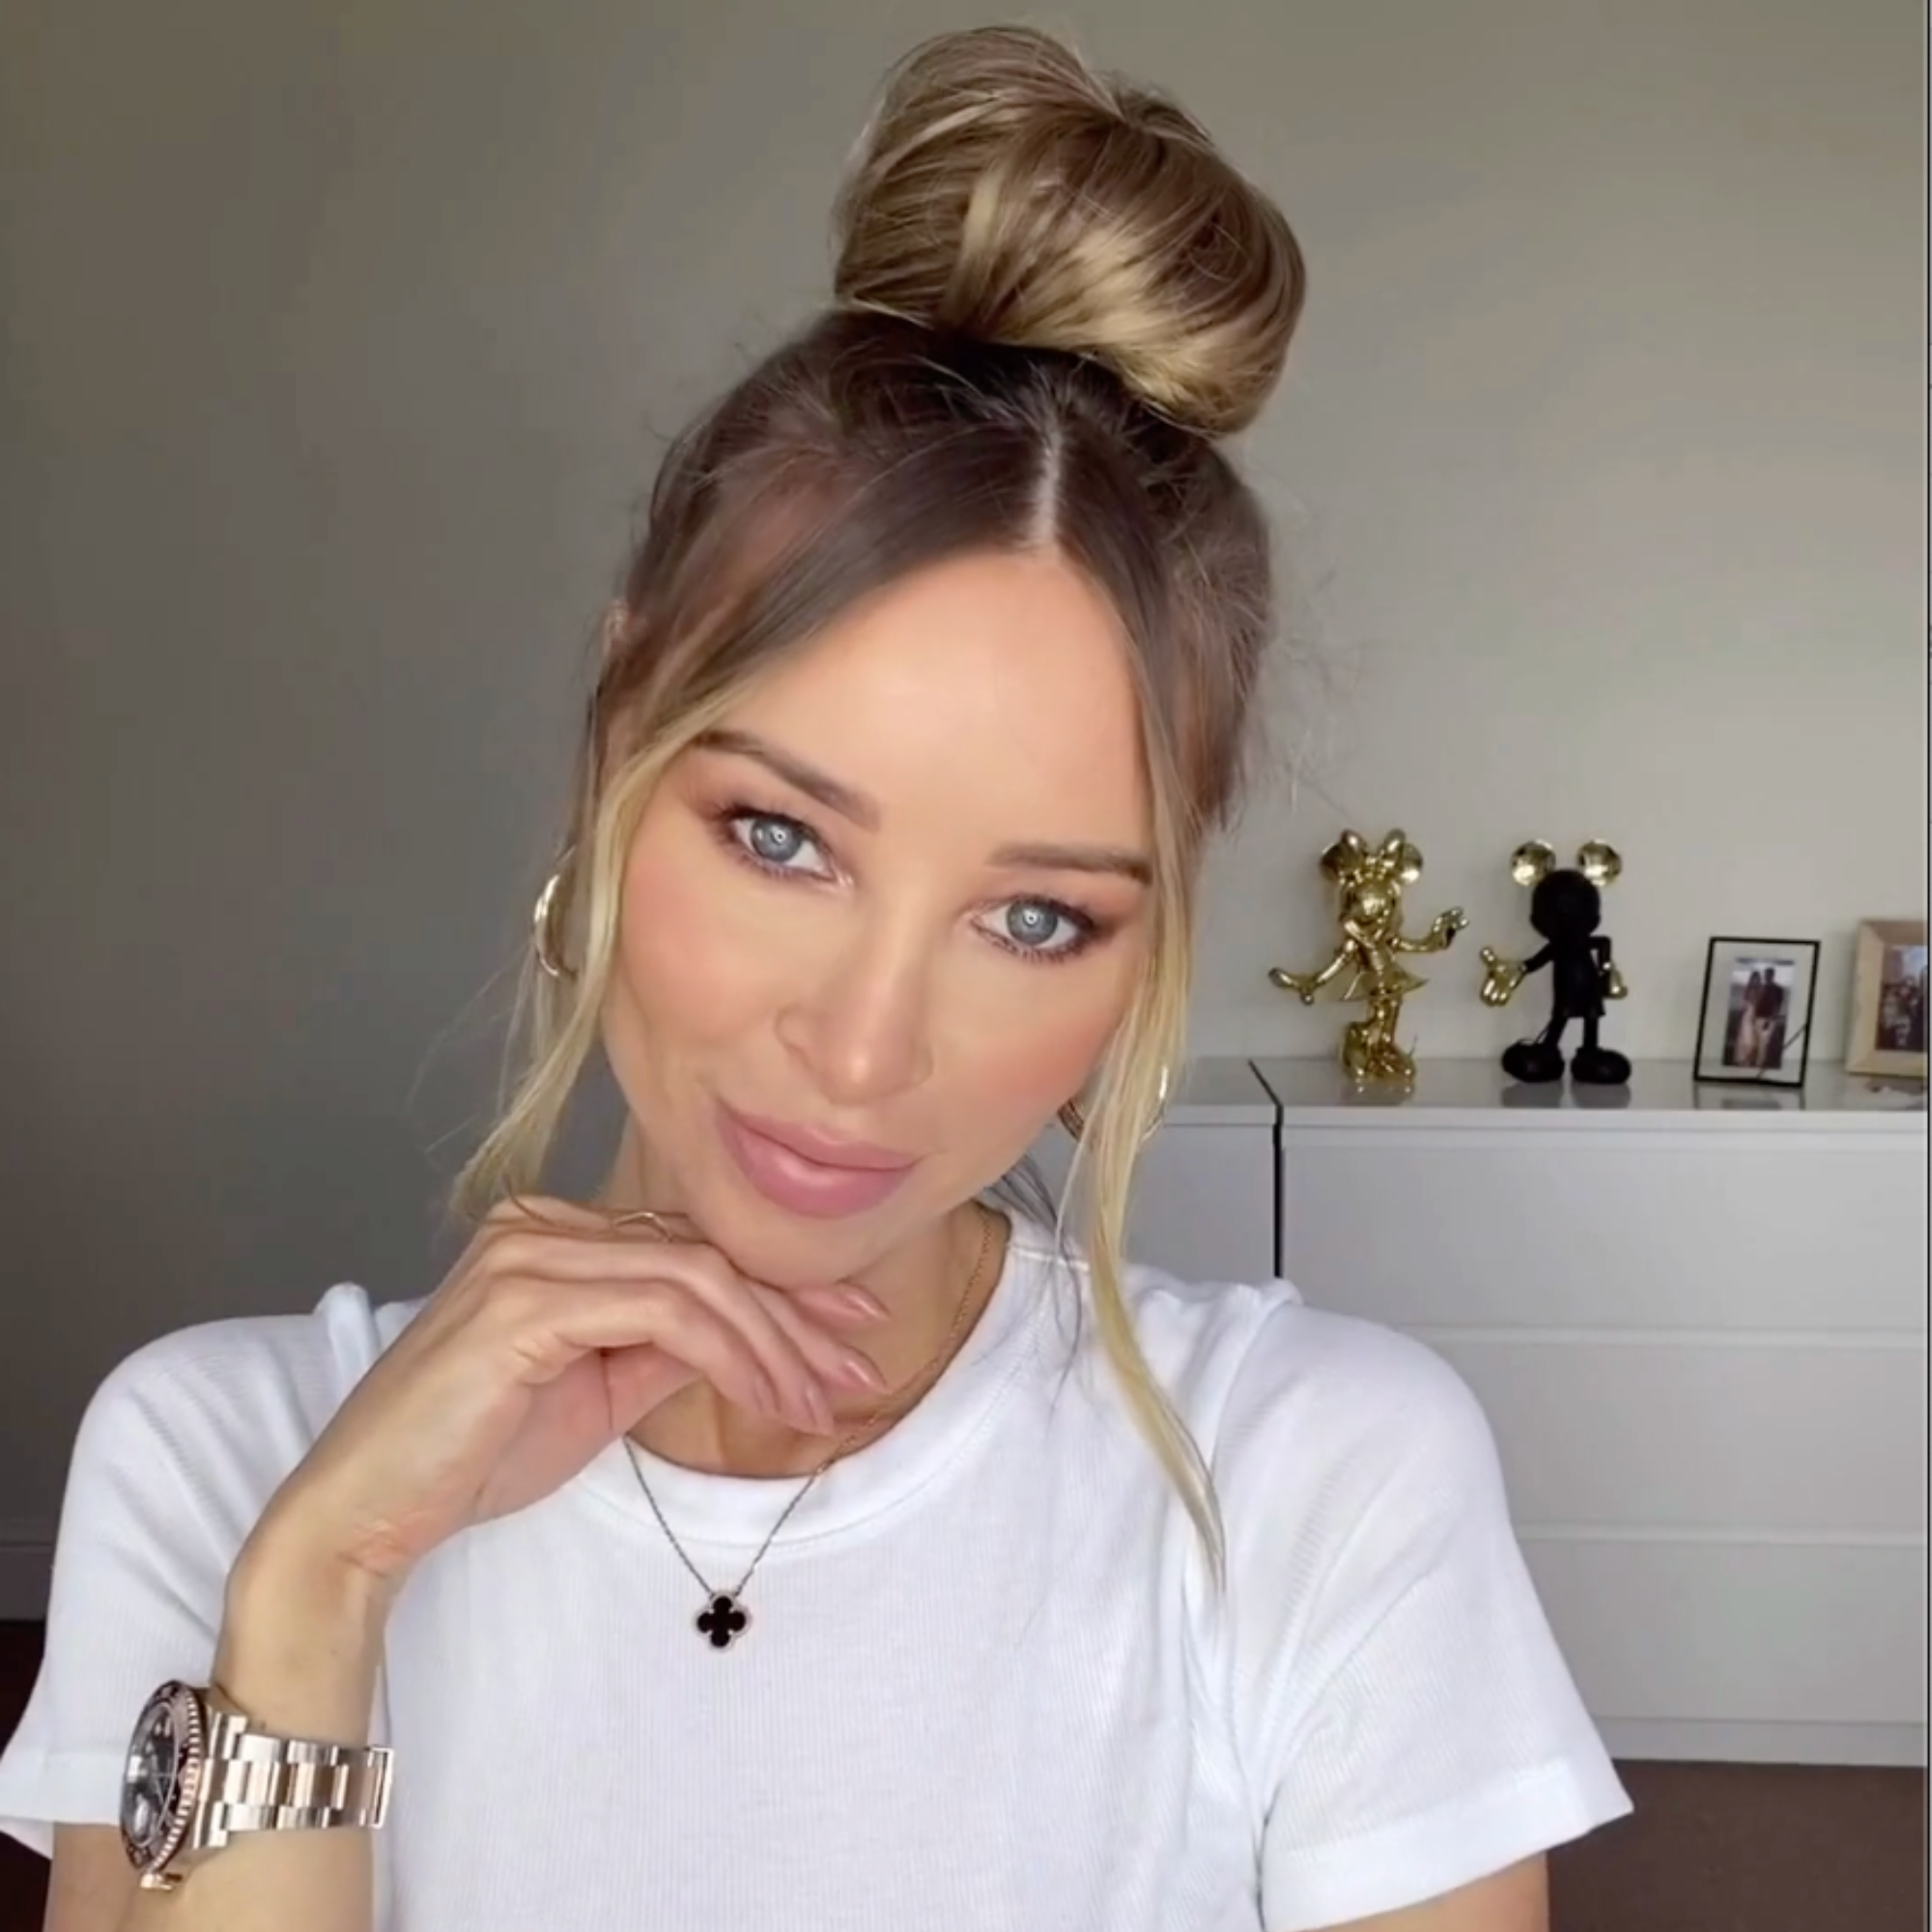 Hair Rehab LDN founder Lauren Pope wears the Messy Clip-on Bun in blonde balayage shade